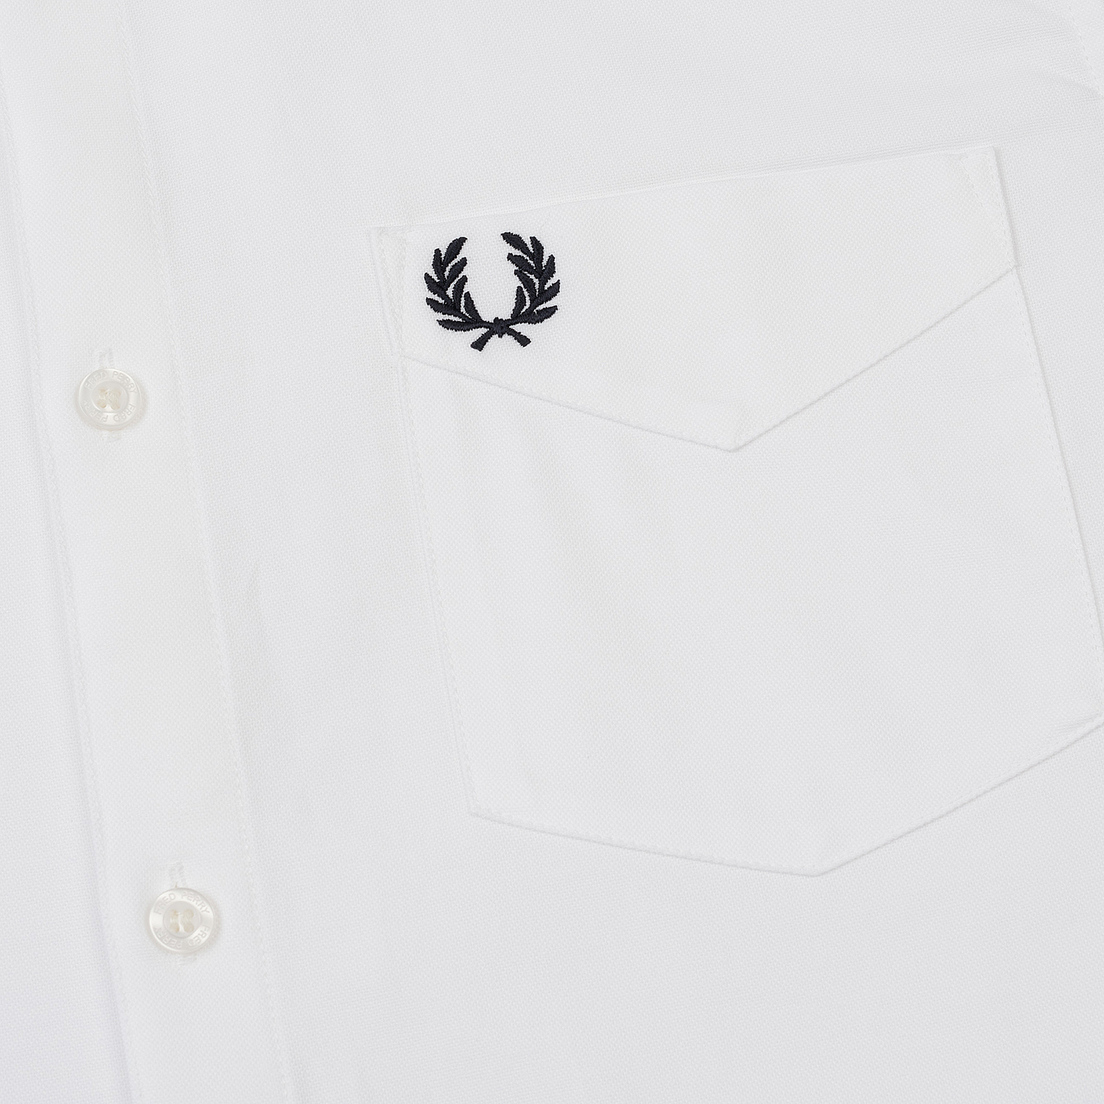 Fred Perry Мужская рубашка Classic Oxford Cotton